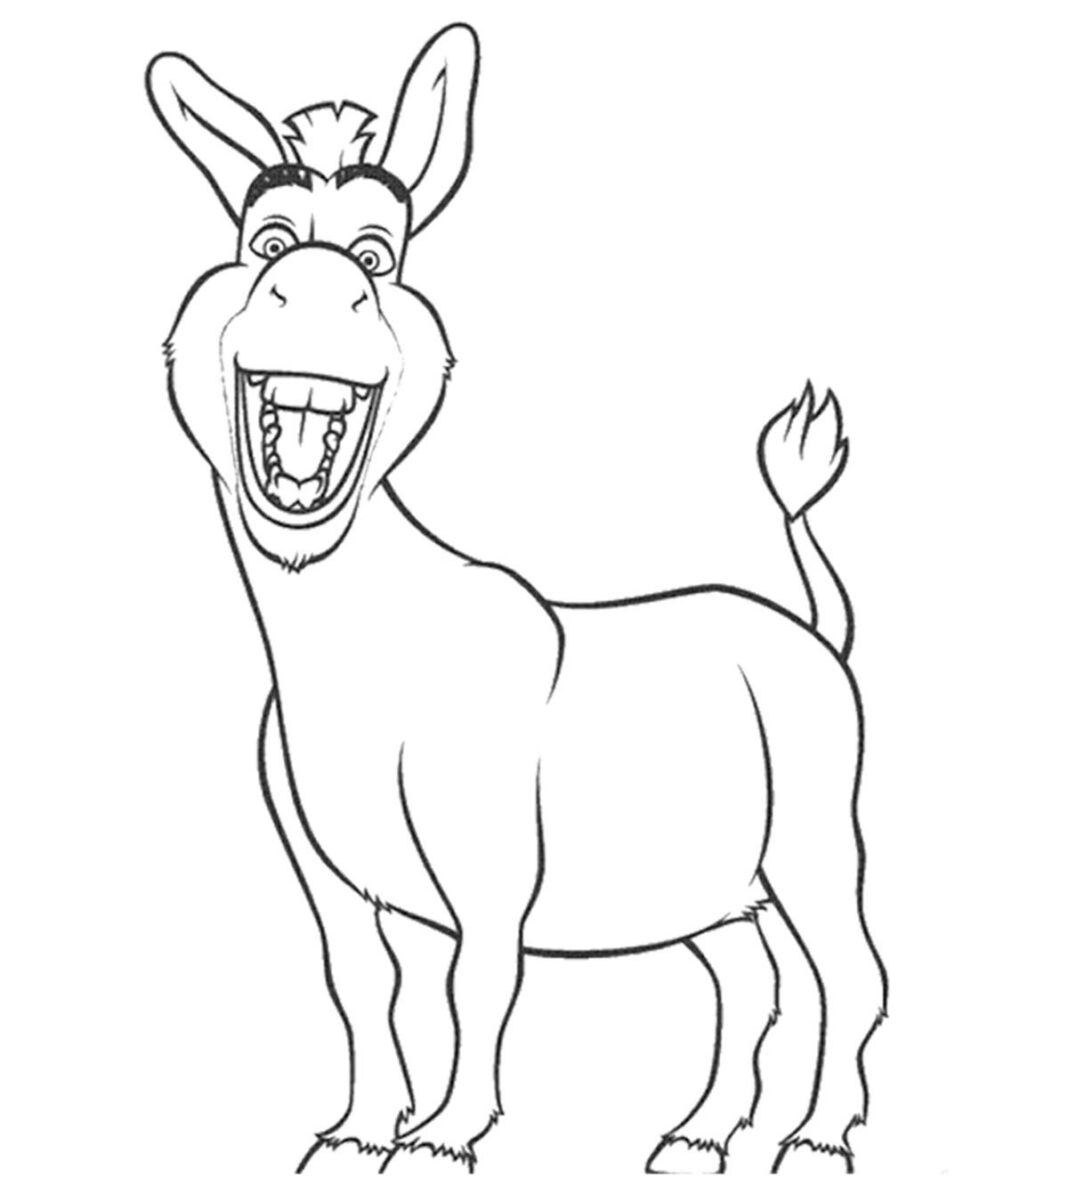 Donkey from the cartoon Shrek coloring book to print